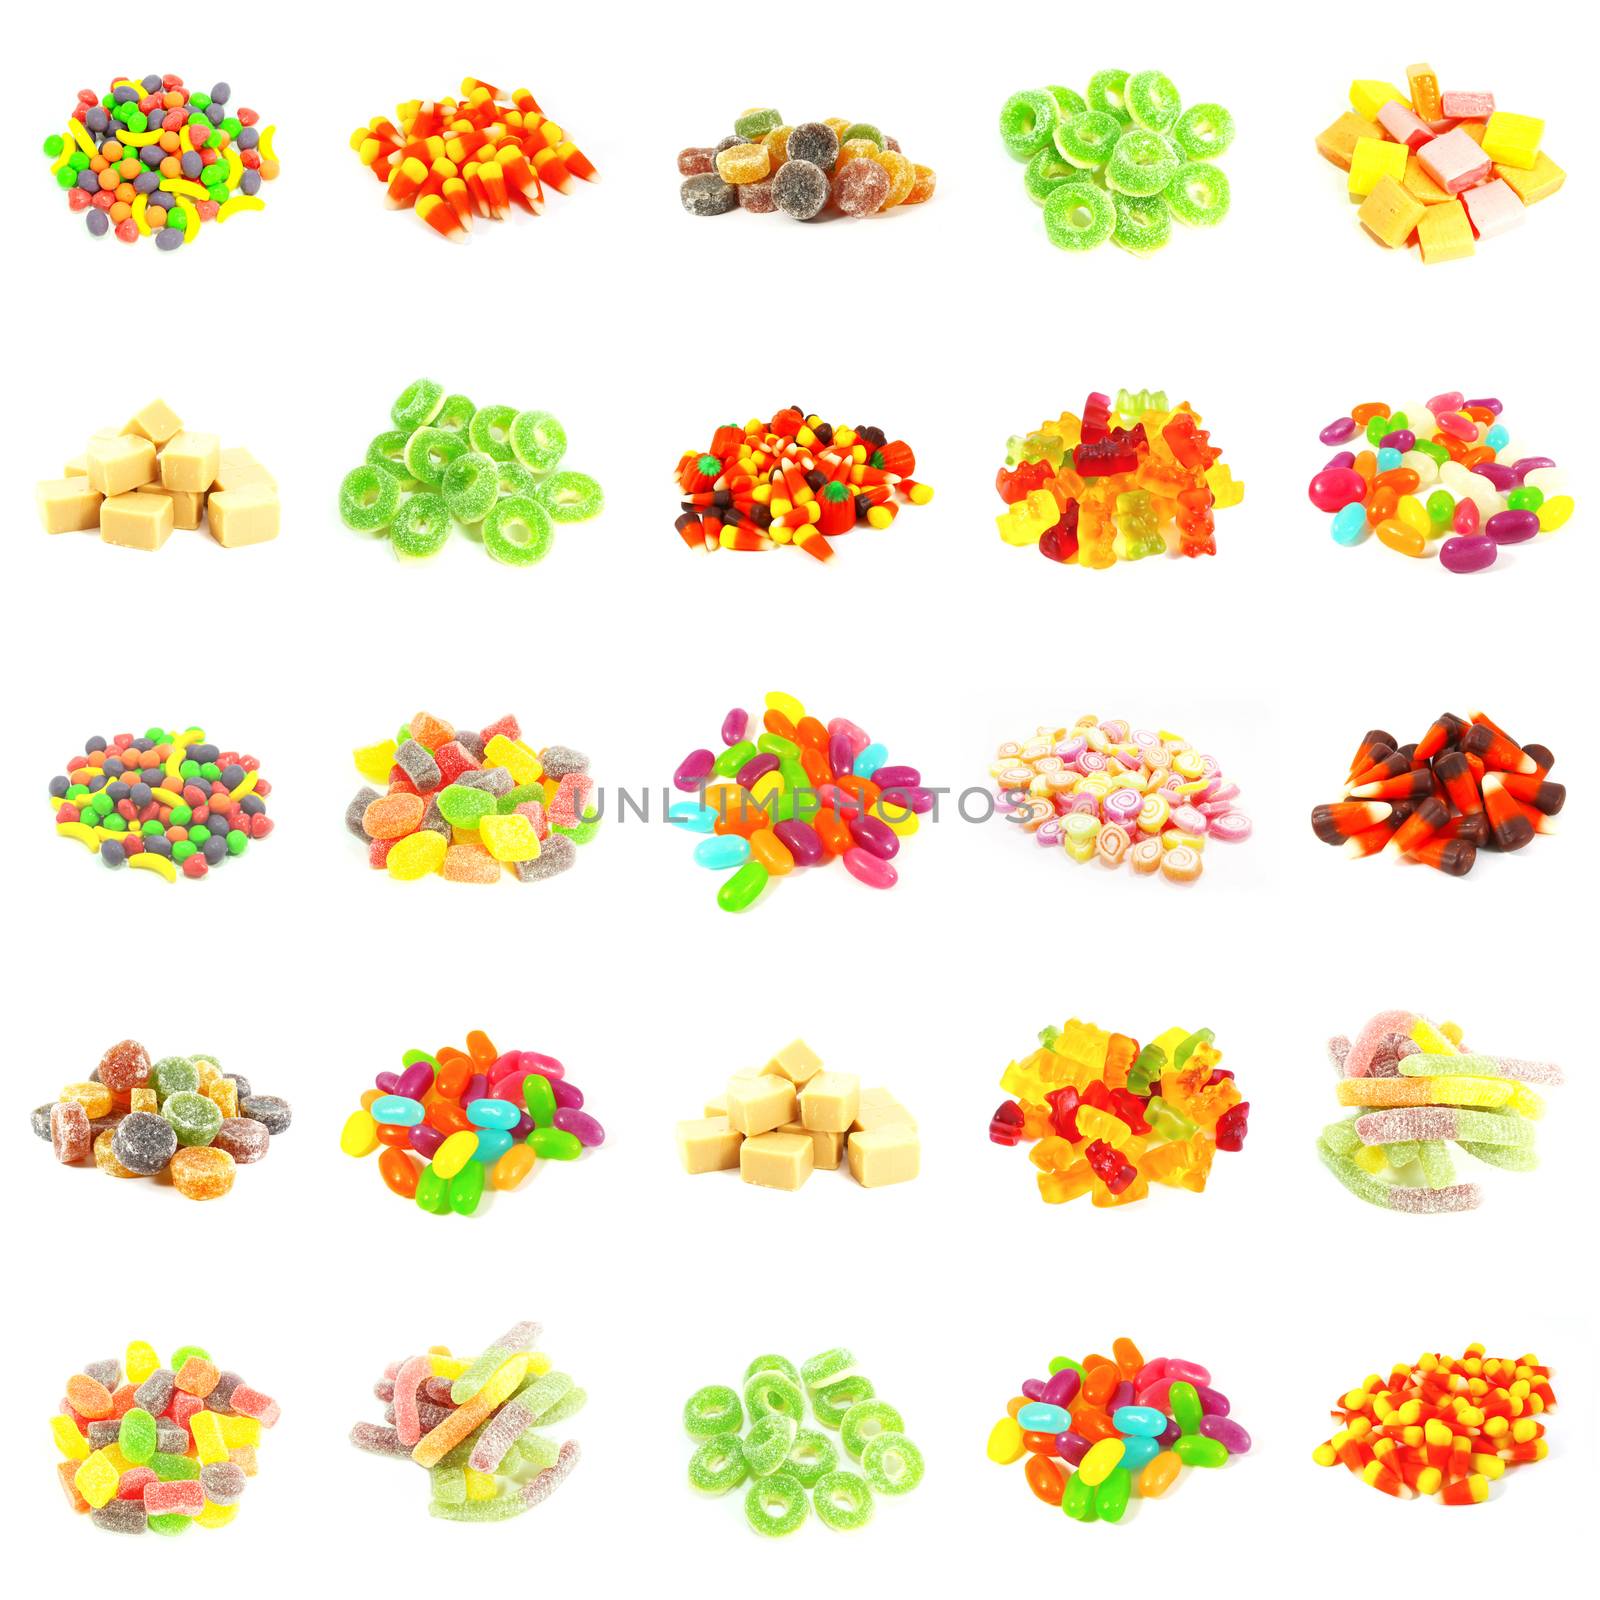 Background of Colorful Candy of Assorted Types Isolated